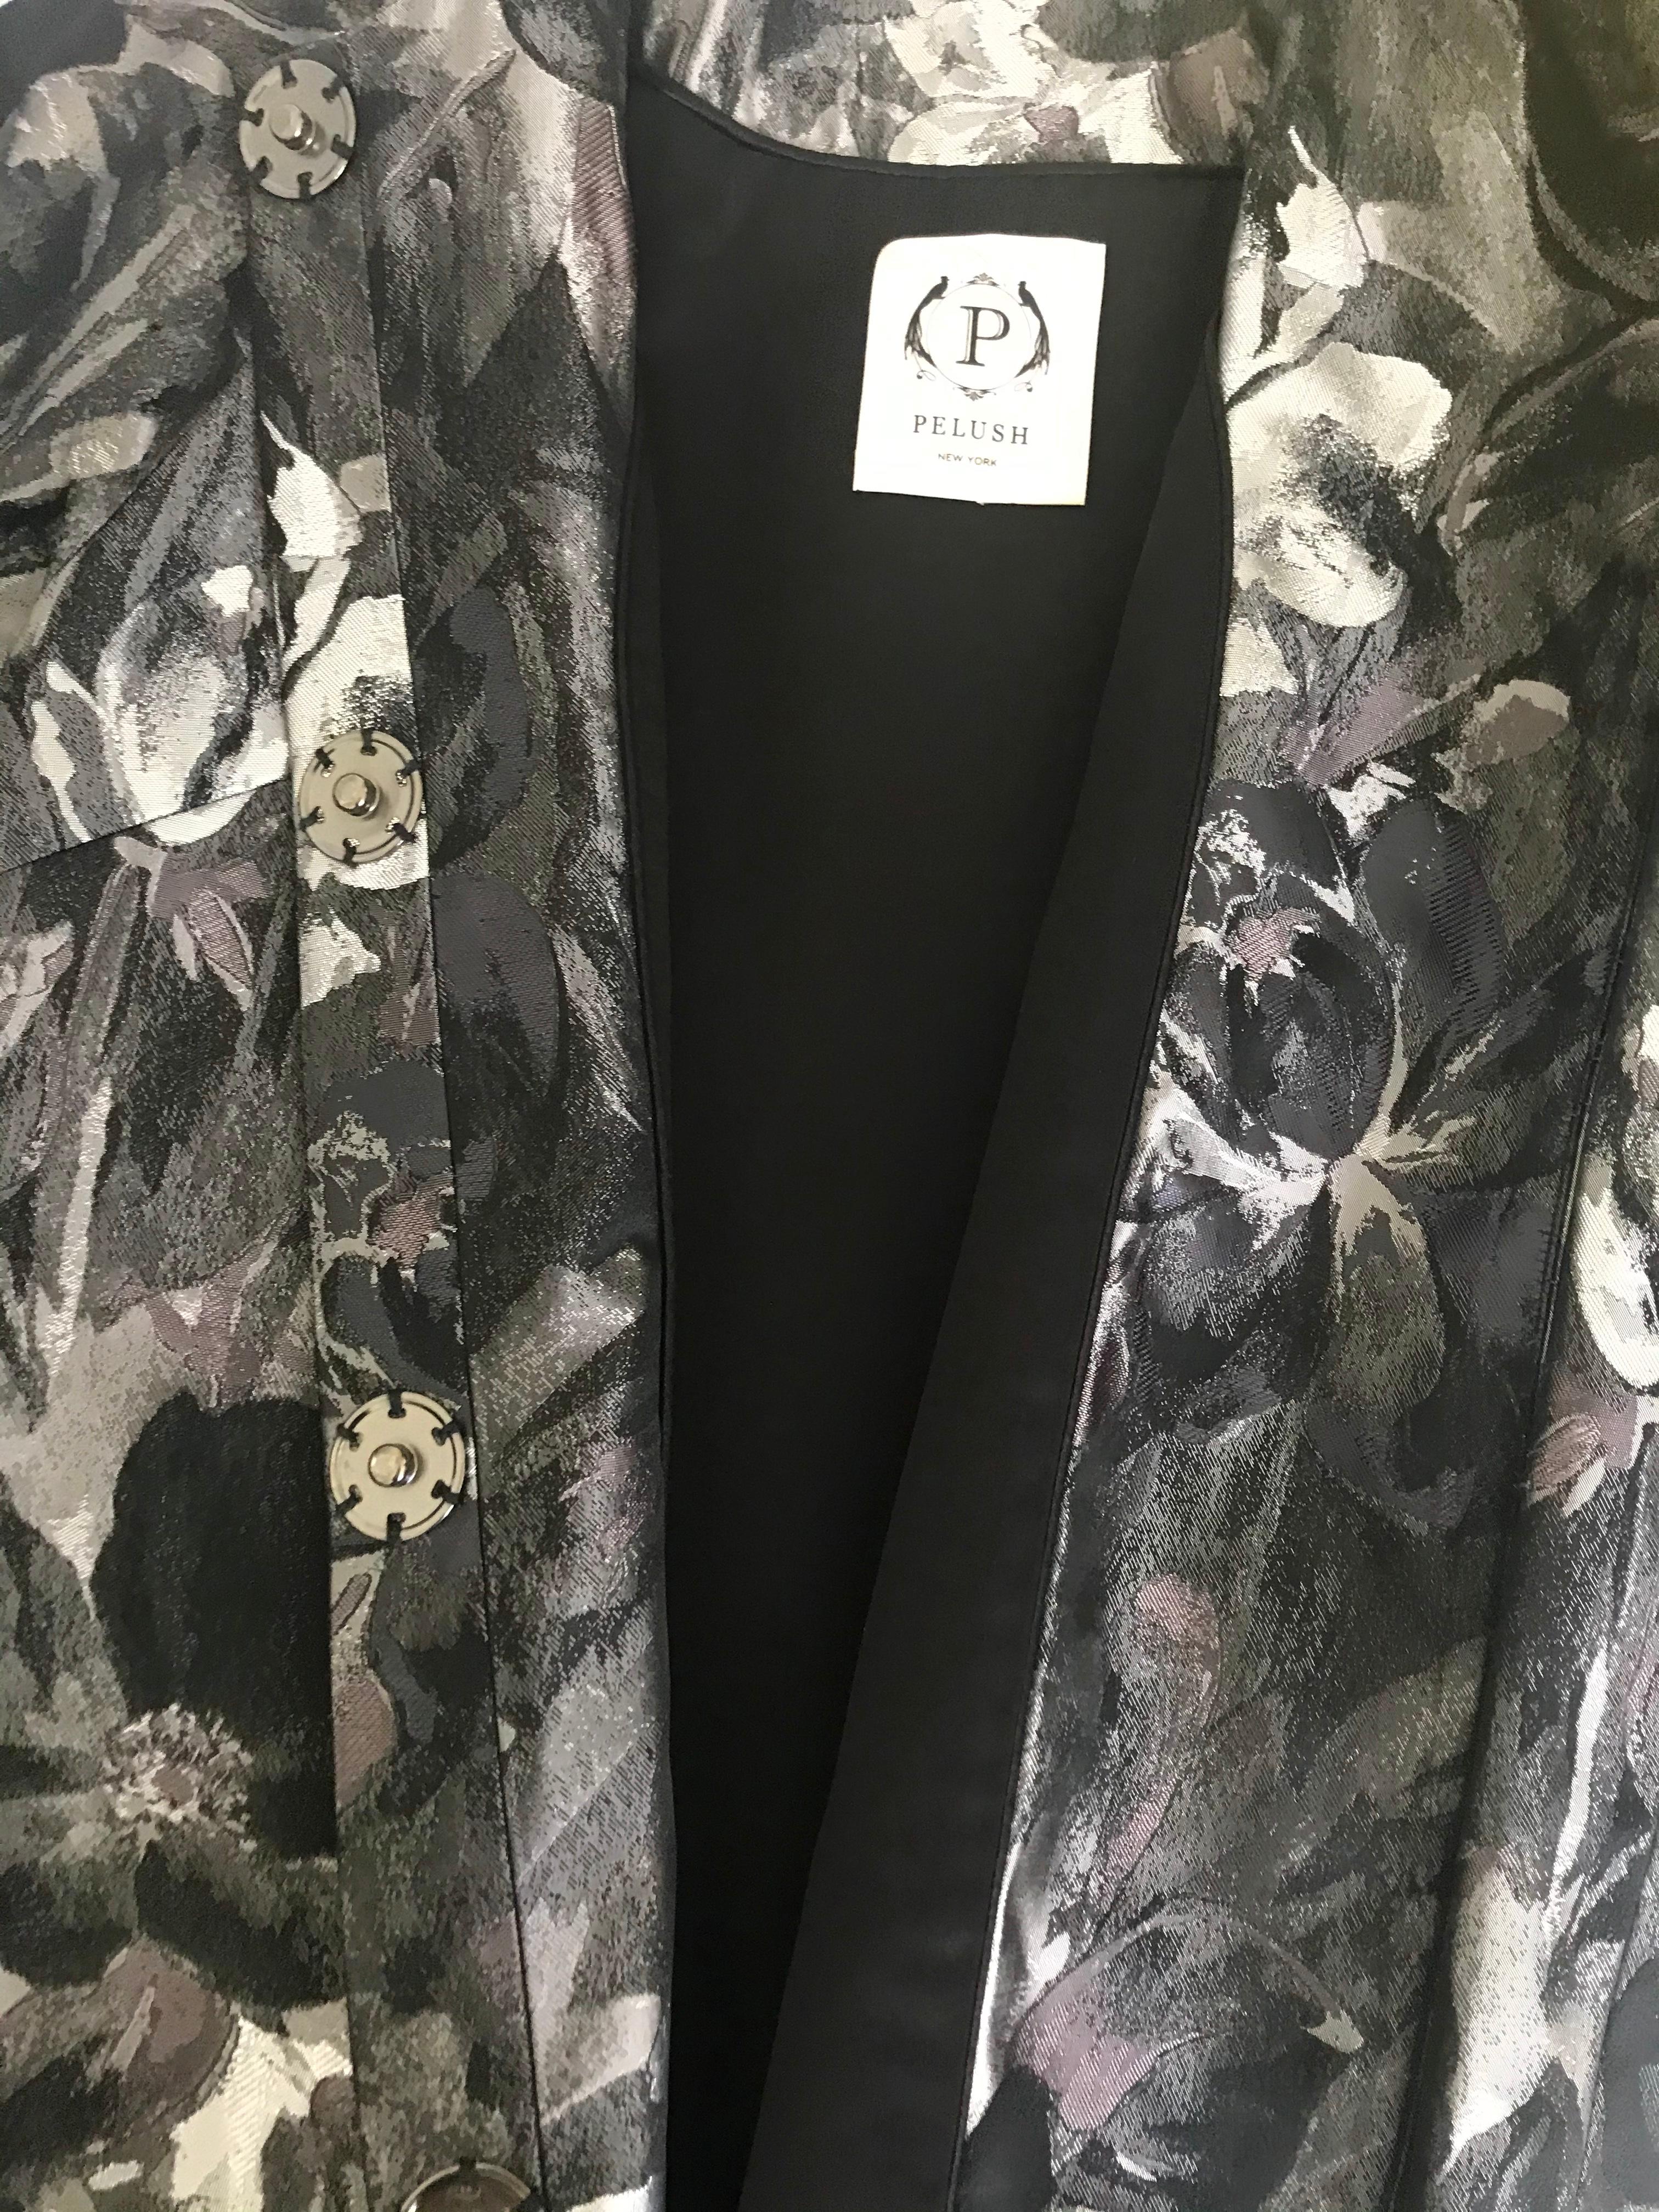 Pelush Black and Silver Brocade Printed Flower Coat - XS For Sale 9